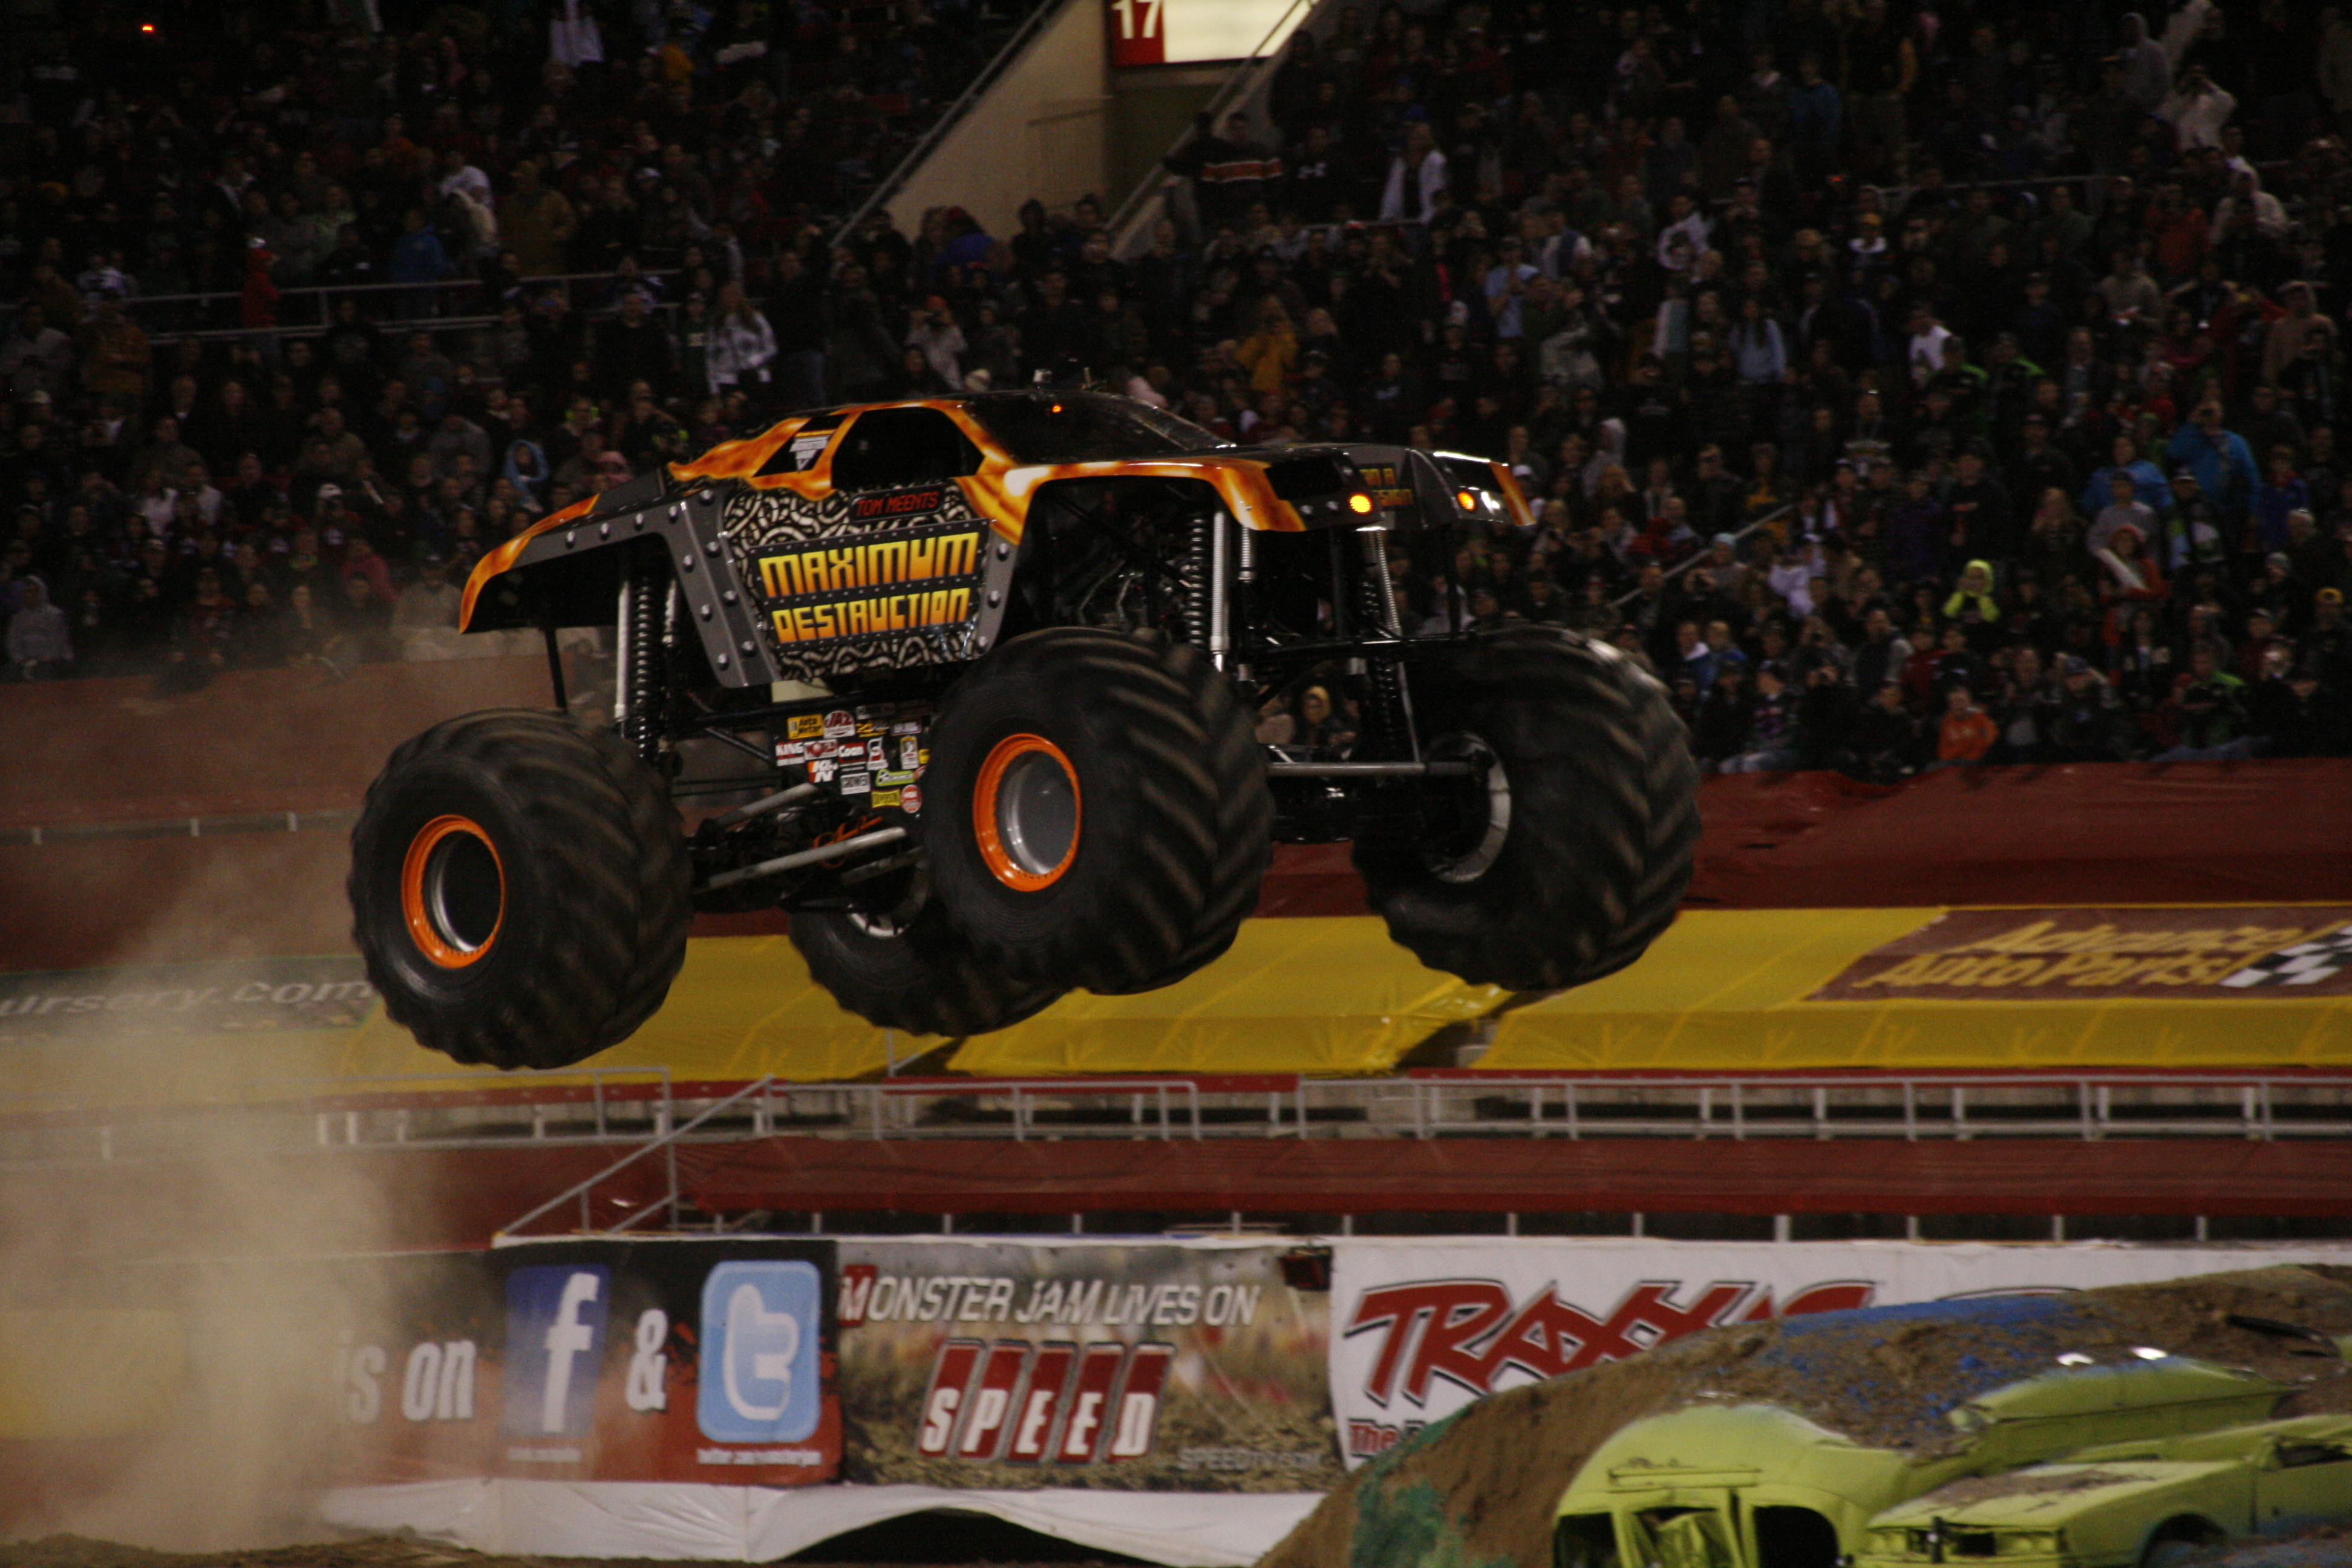 We need more solid axle monster trucks!